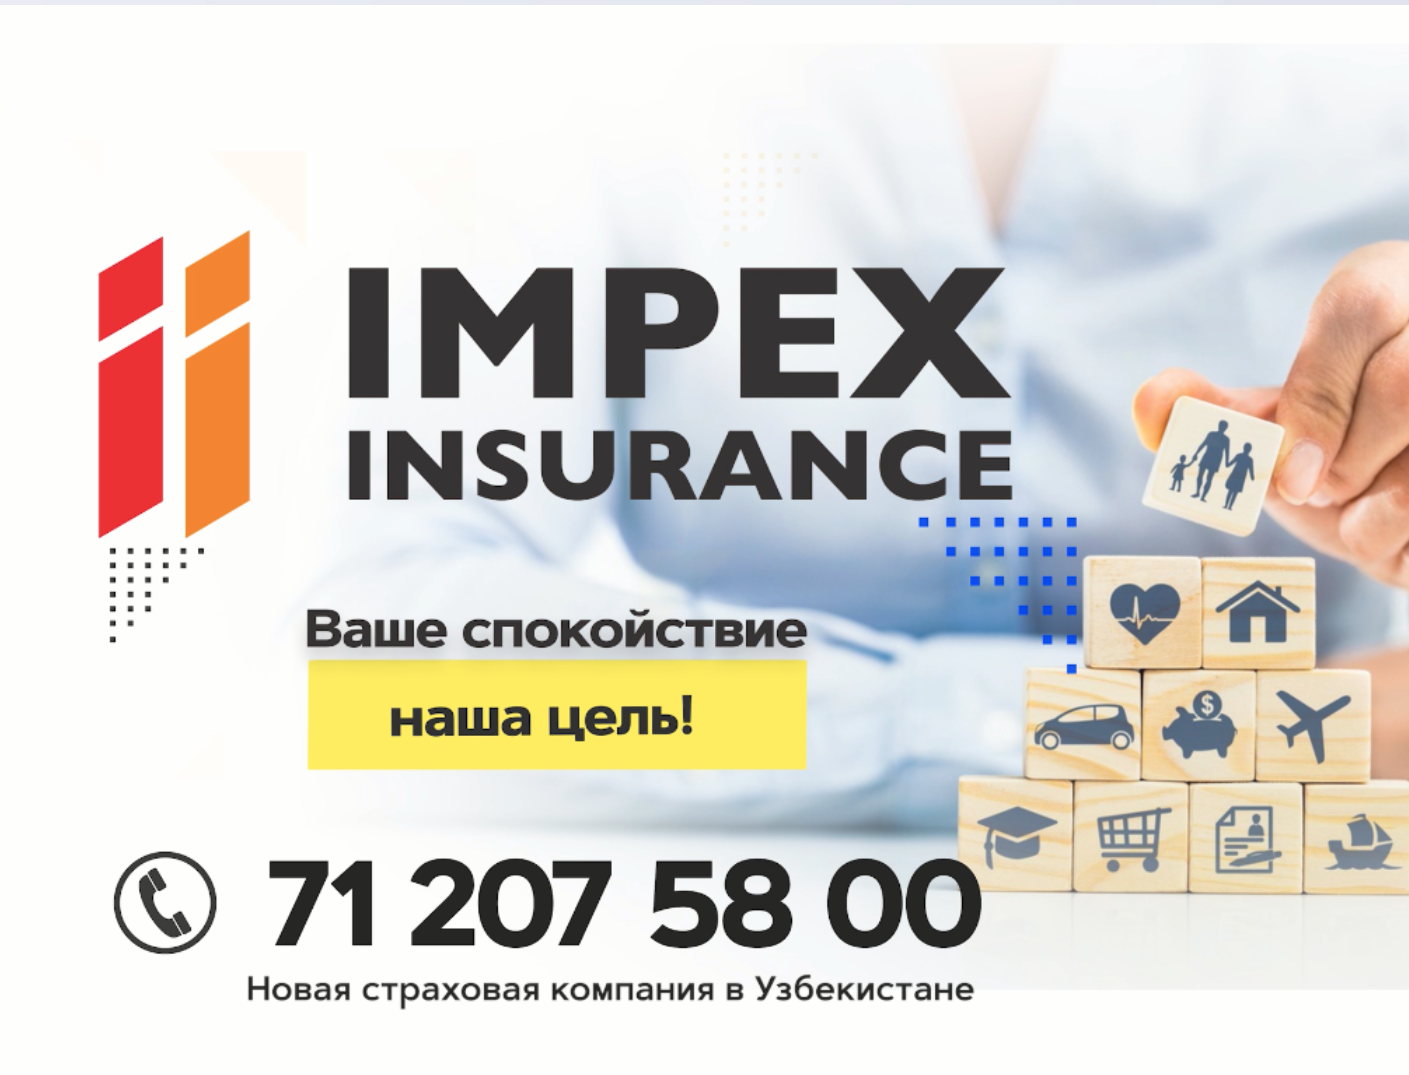 Impex Insurance: Your tranquility is our goal!